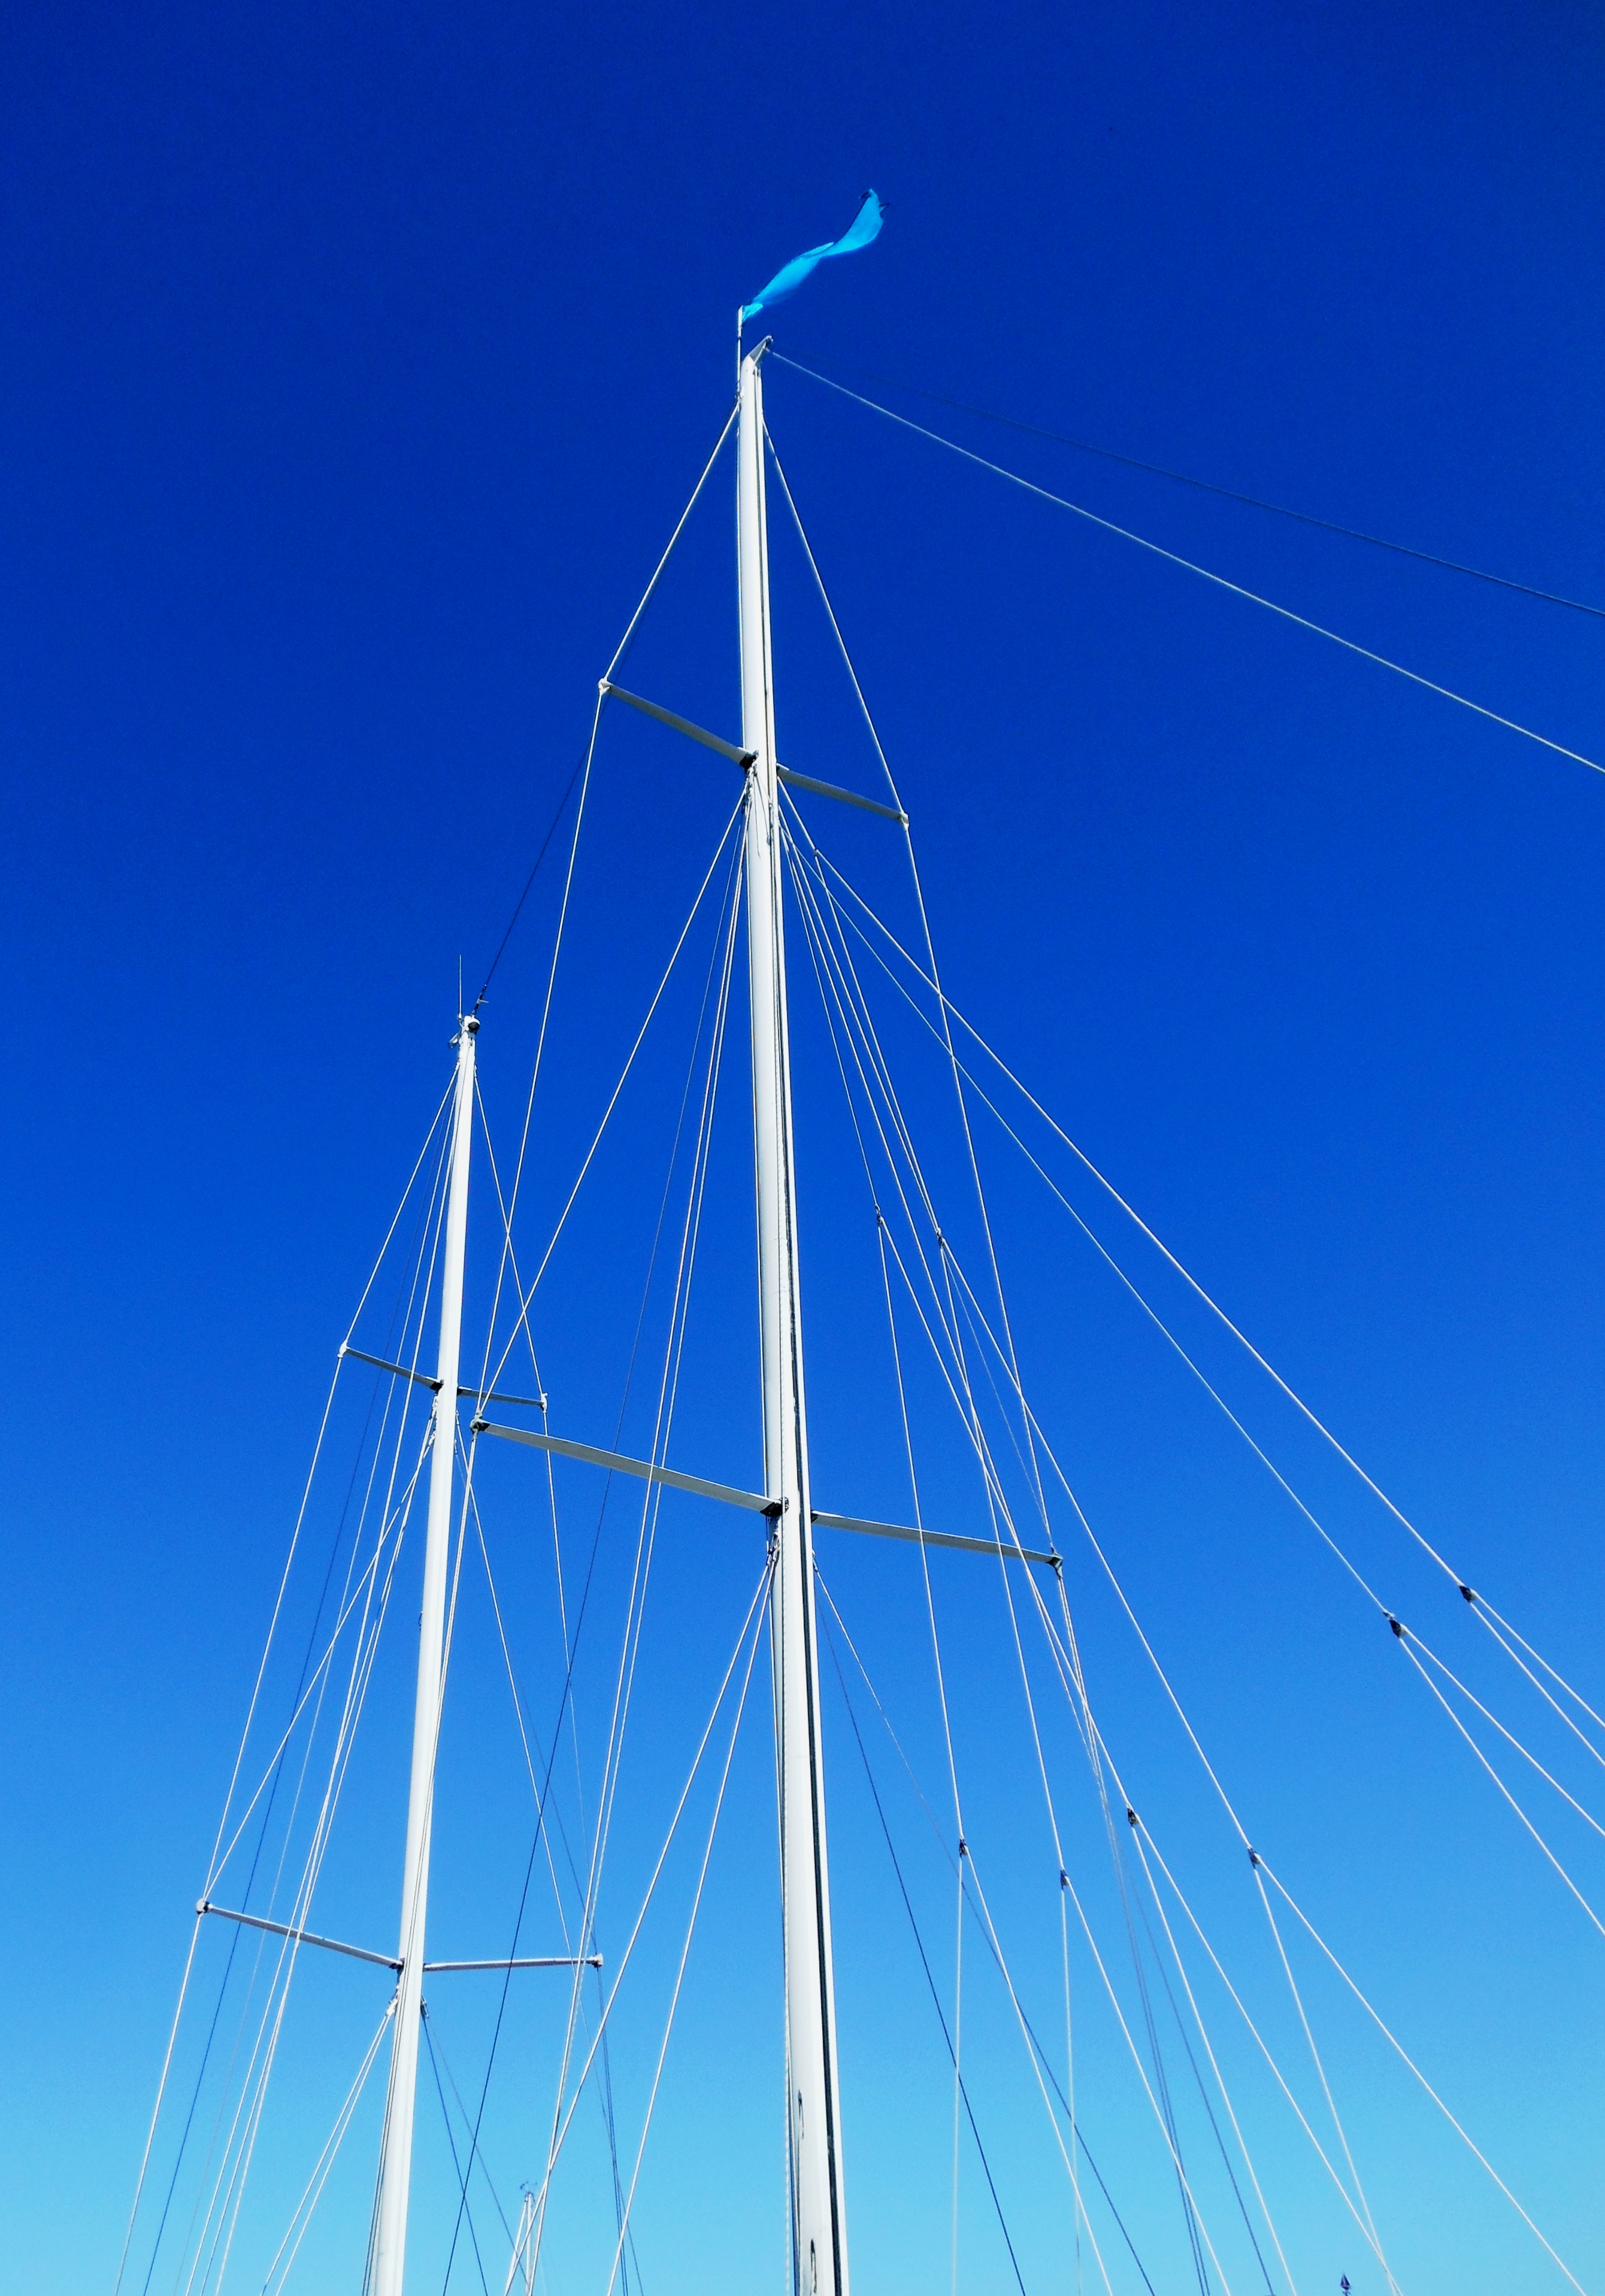 Masts and rigging against brilliant blue sky